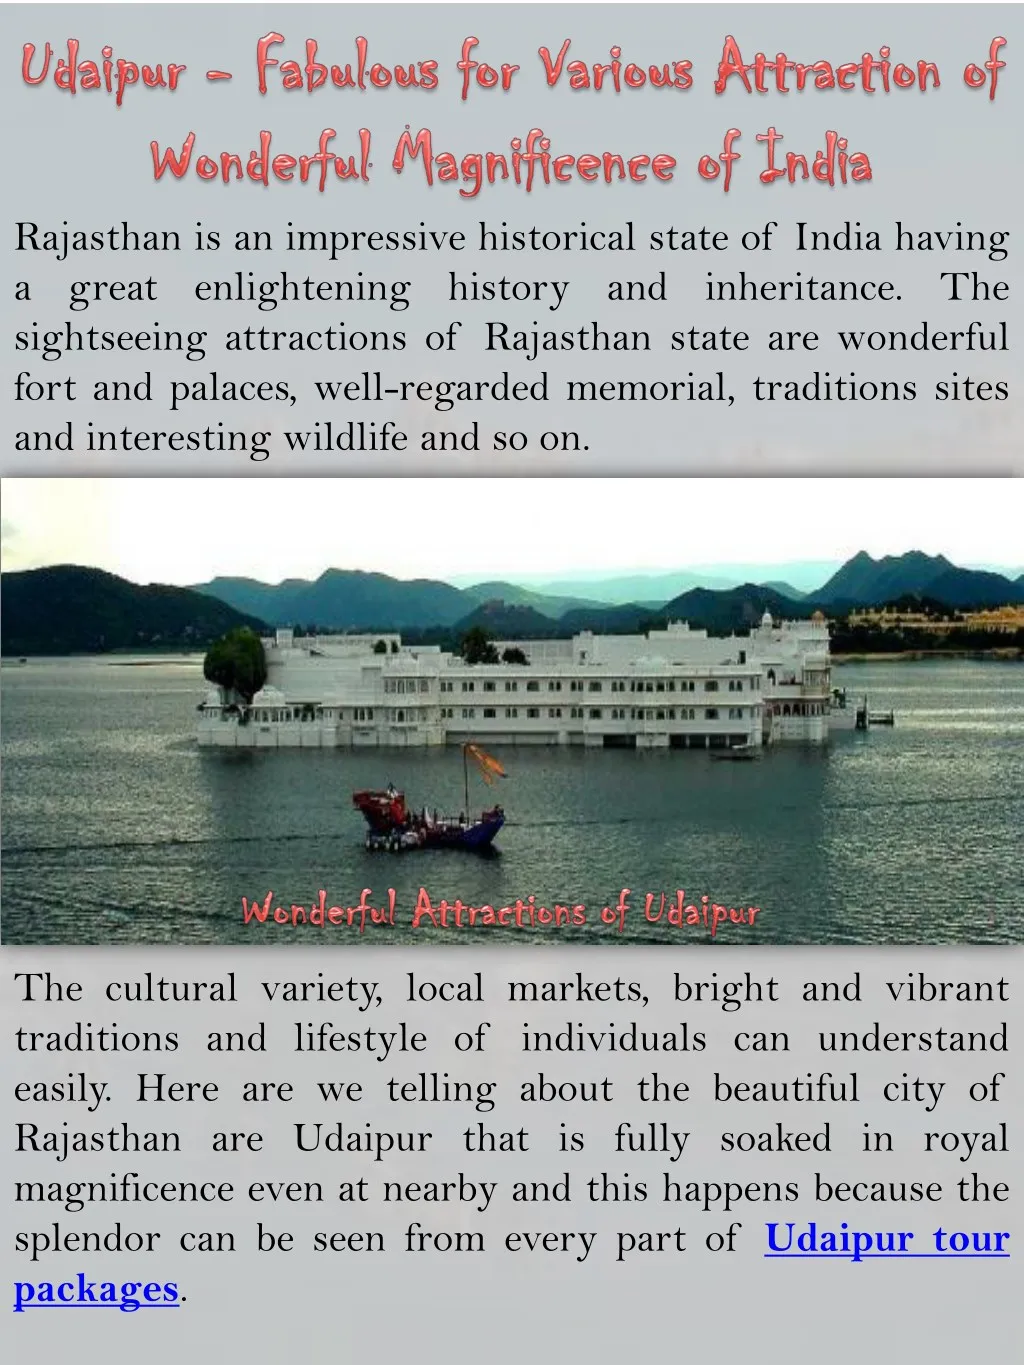 rajasthan is an impressive historical state